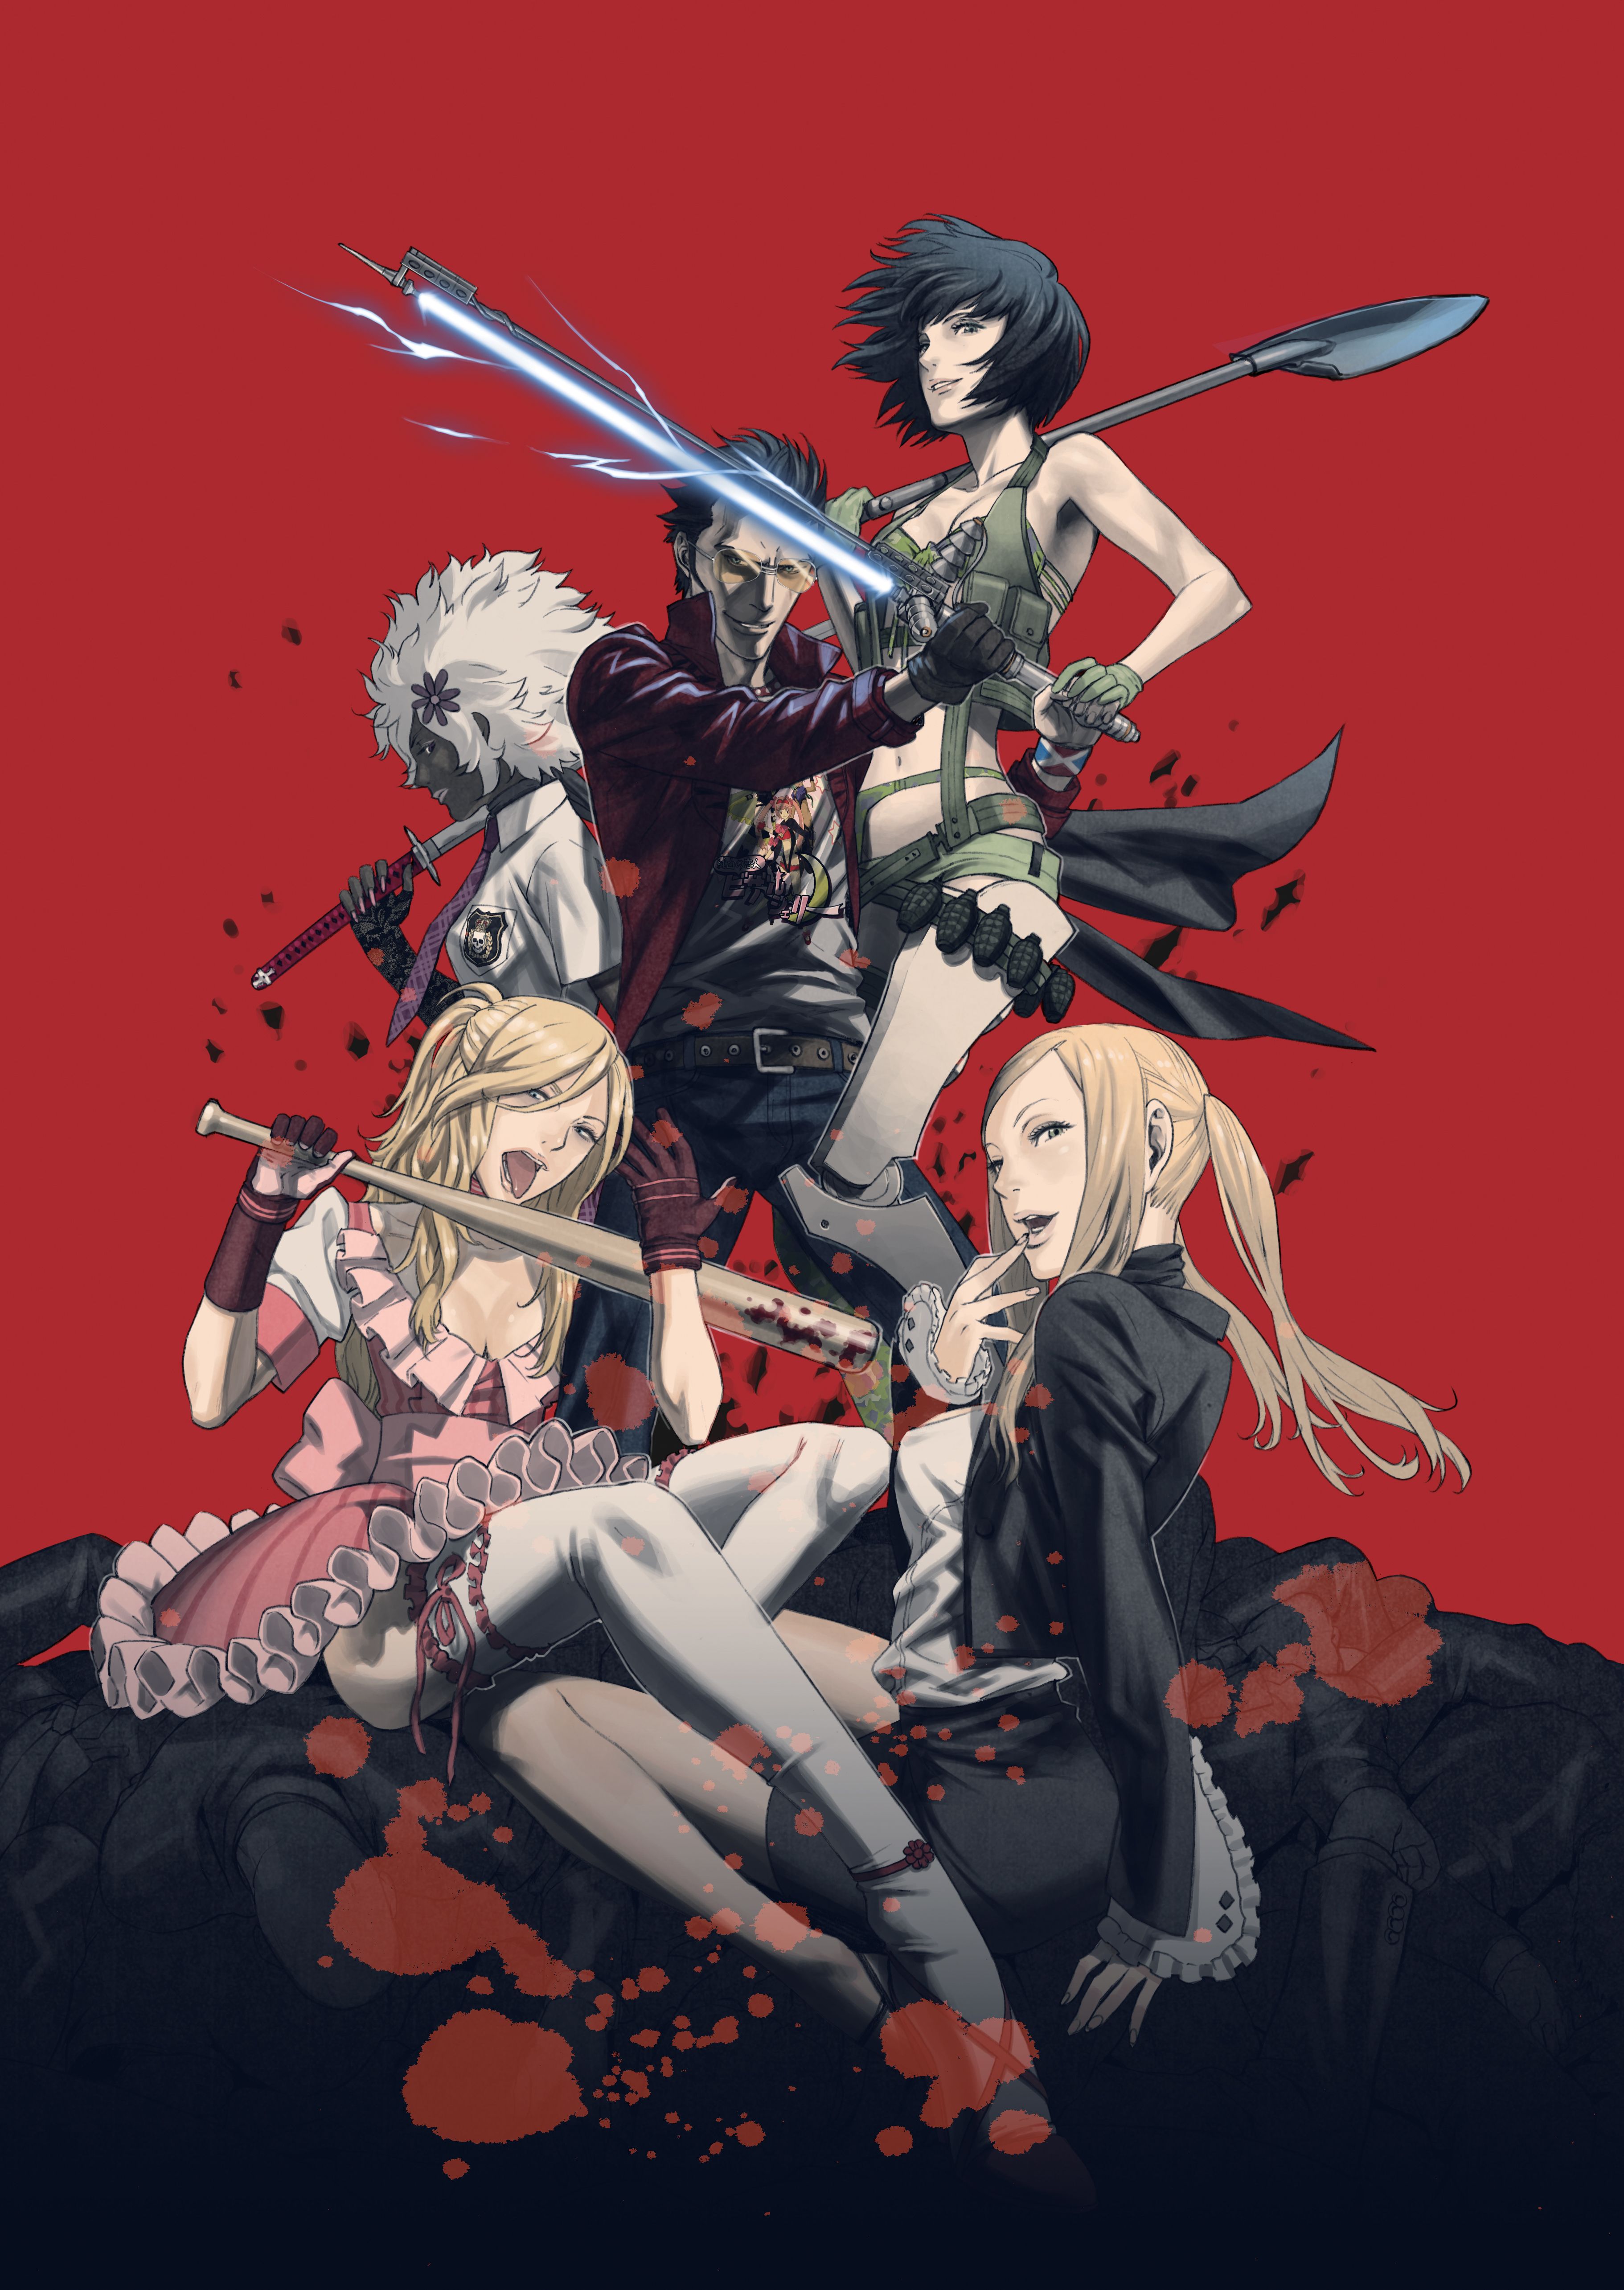 No More Heroes Anime Image Board